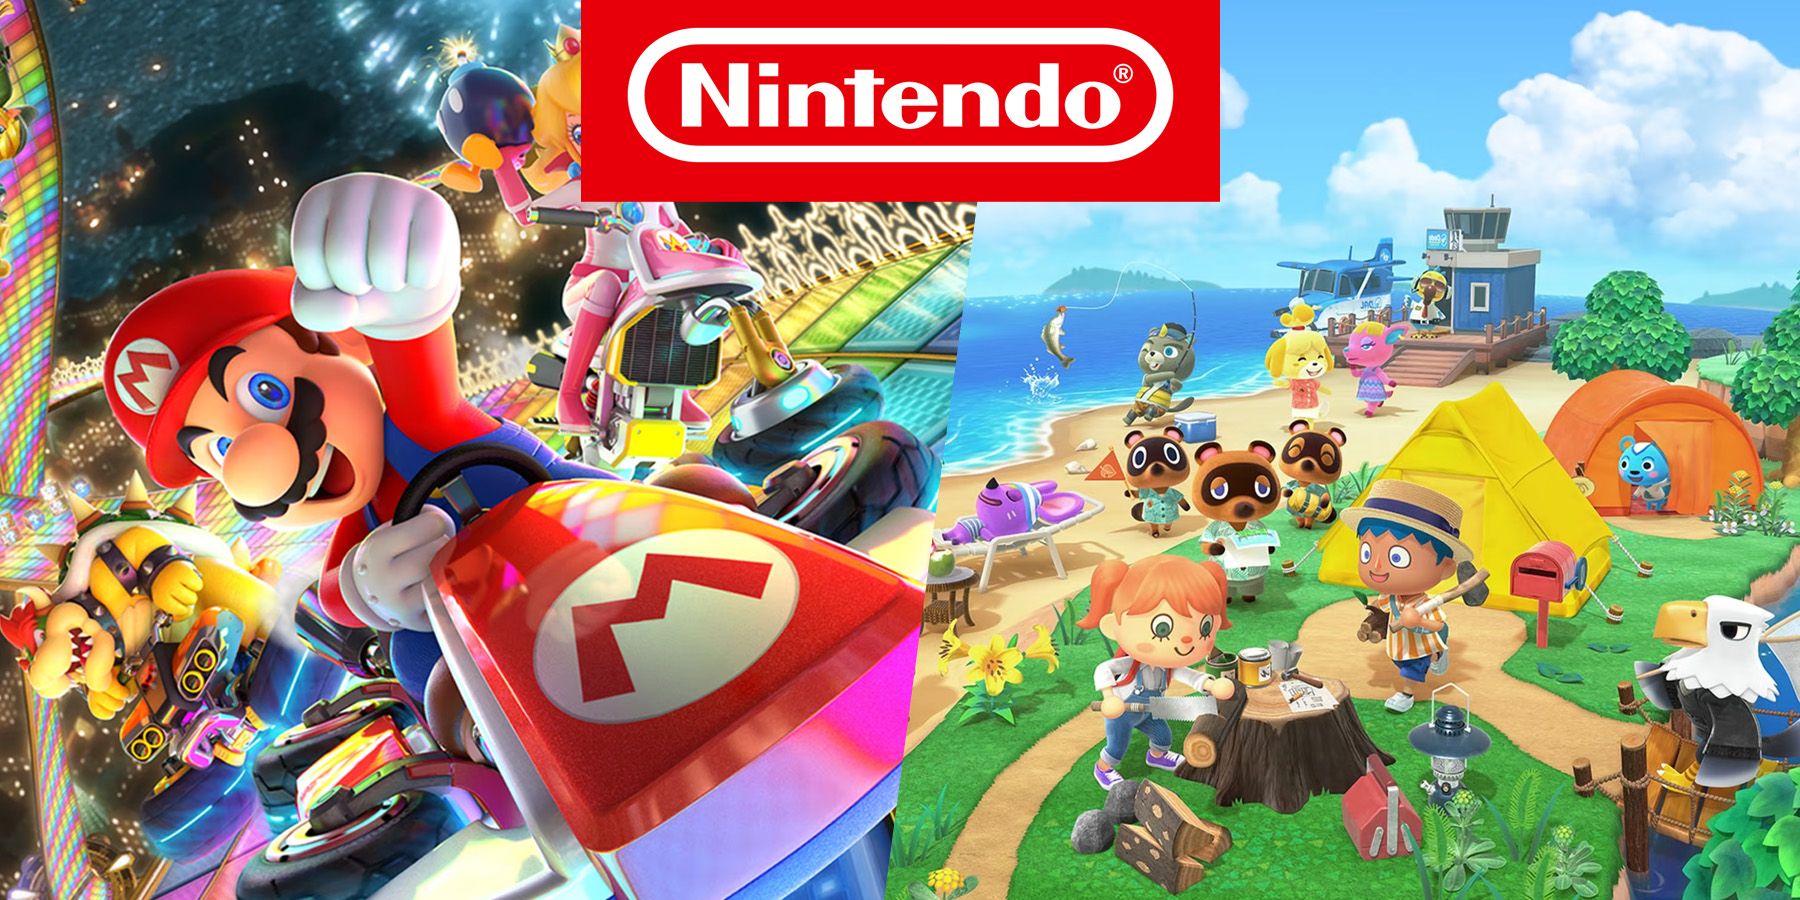 box art for mario kart 8 deluxe and animal crossing: new horizons side by side with the nintendo logo between them